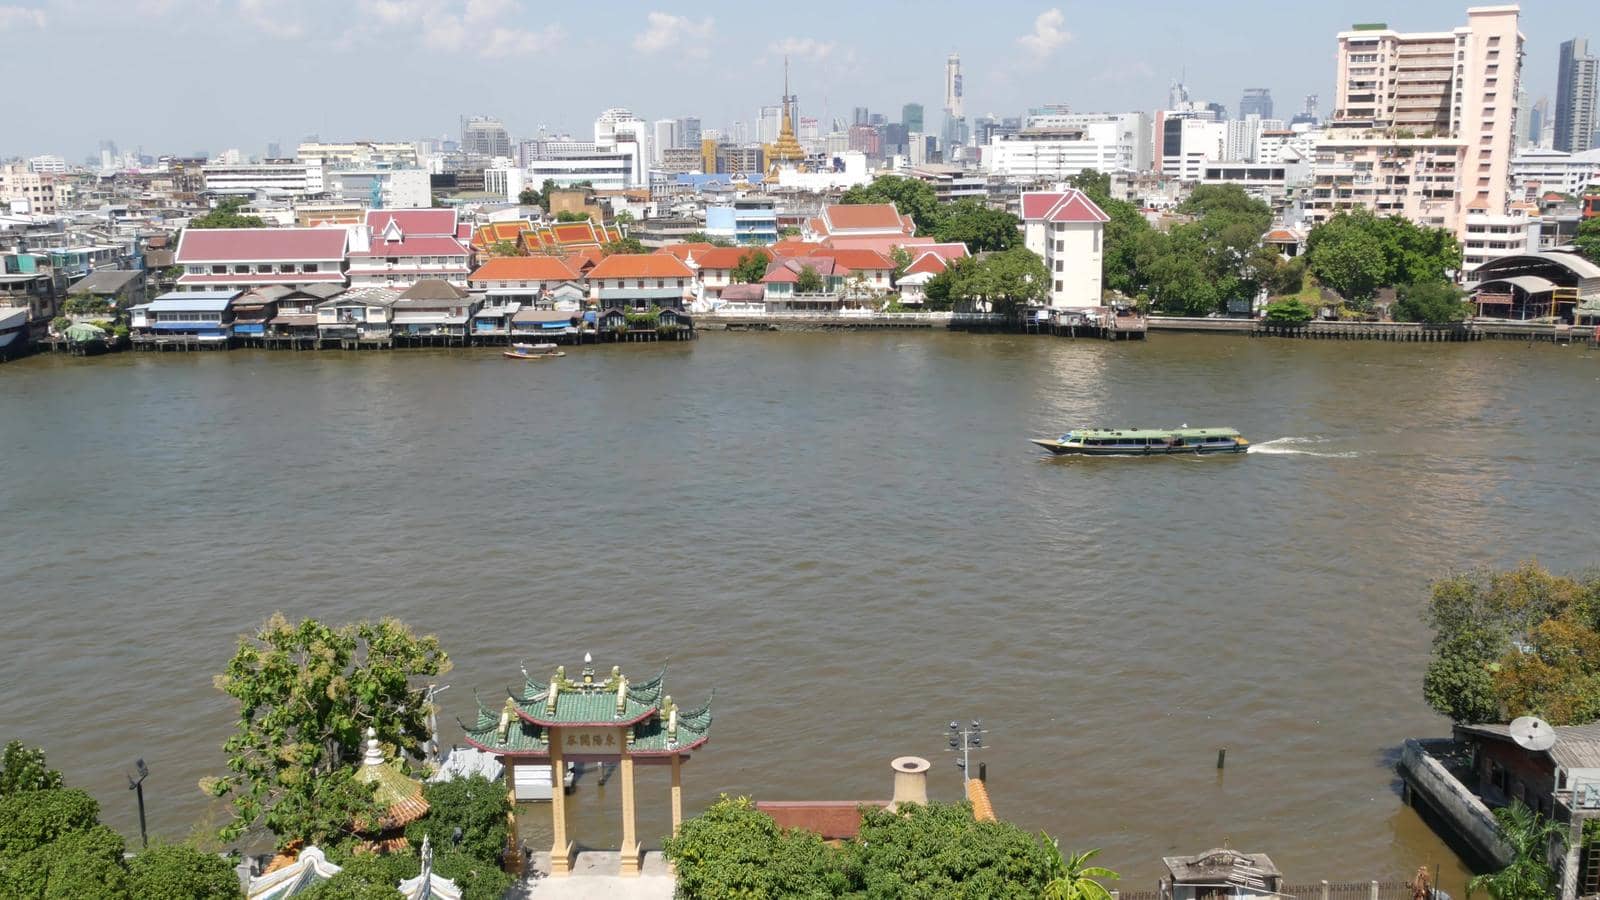 Oriental boat floating on river in Krungthep city. Modern transport vessel floating on calm Chao Praya river on sunny day in Bangkok near chinatown. Panorama by DogoraSun